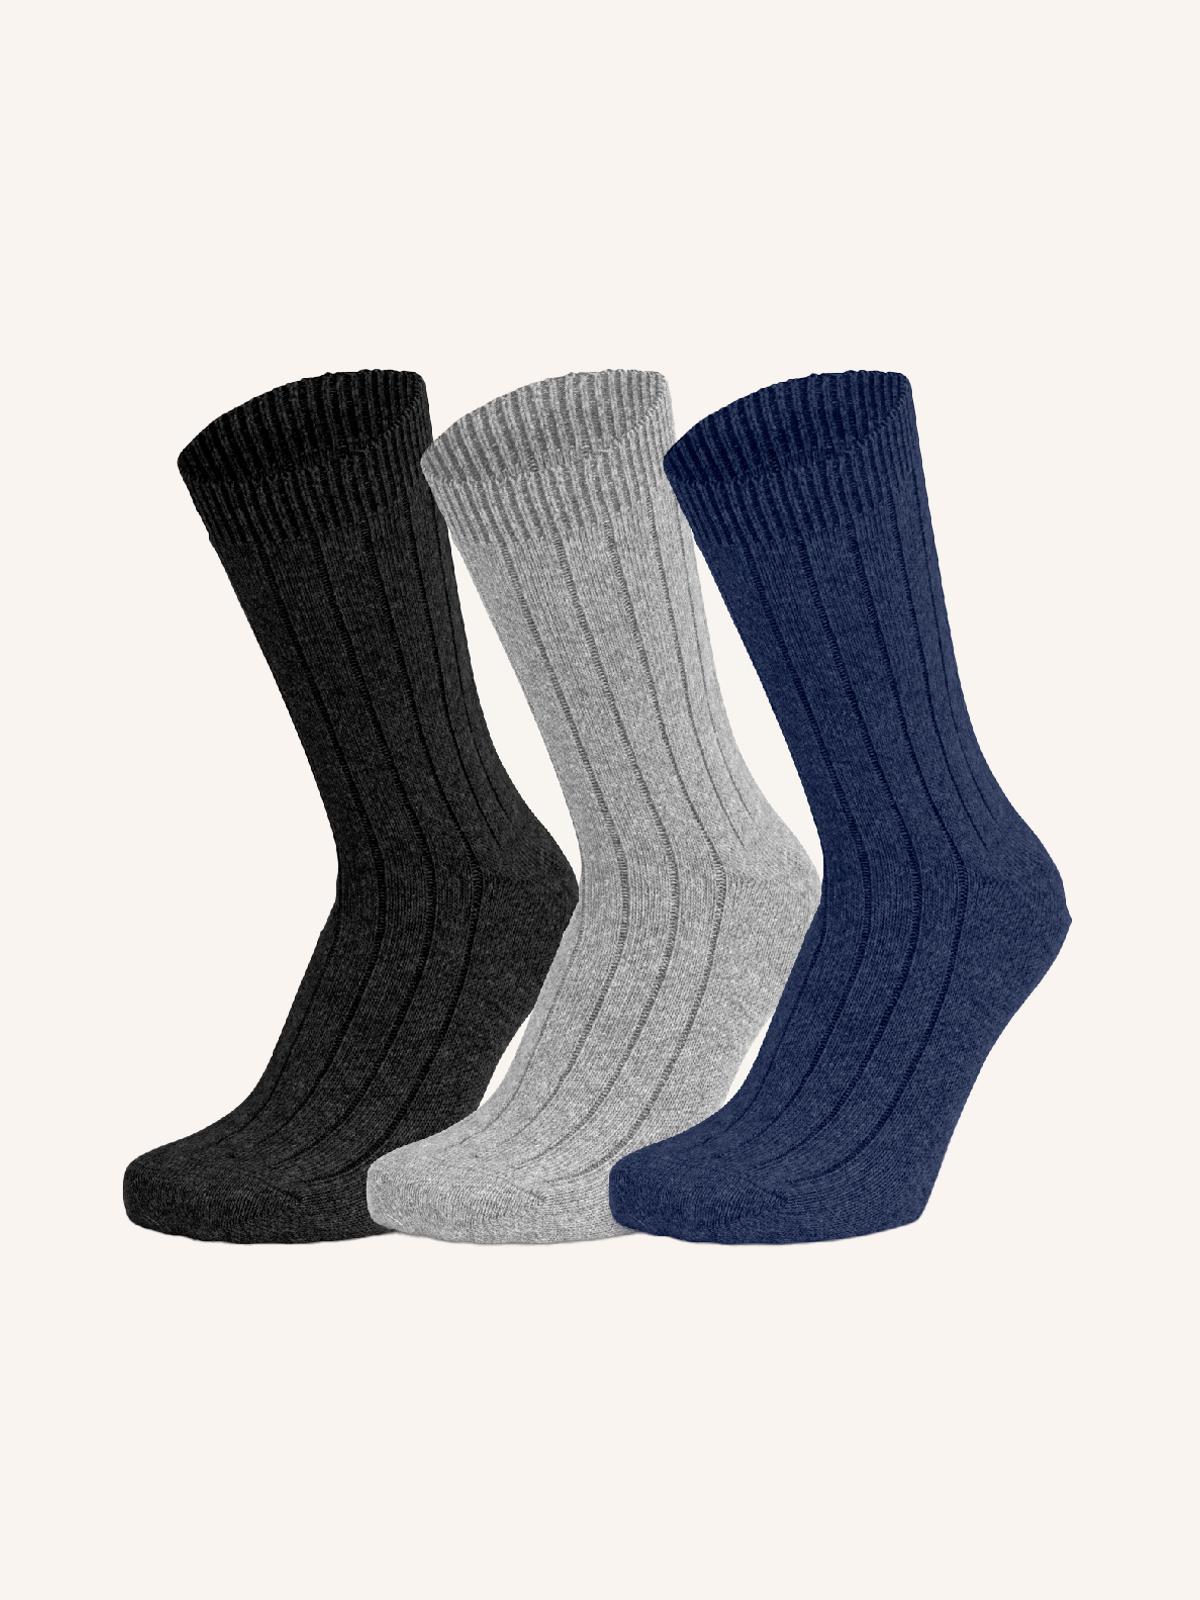 Short Socks in Angora, Cotton and Viscose for Women | Plain Color | Pack of 3 Pairs | Angorella